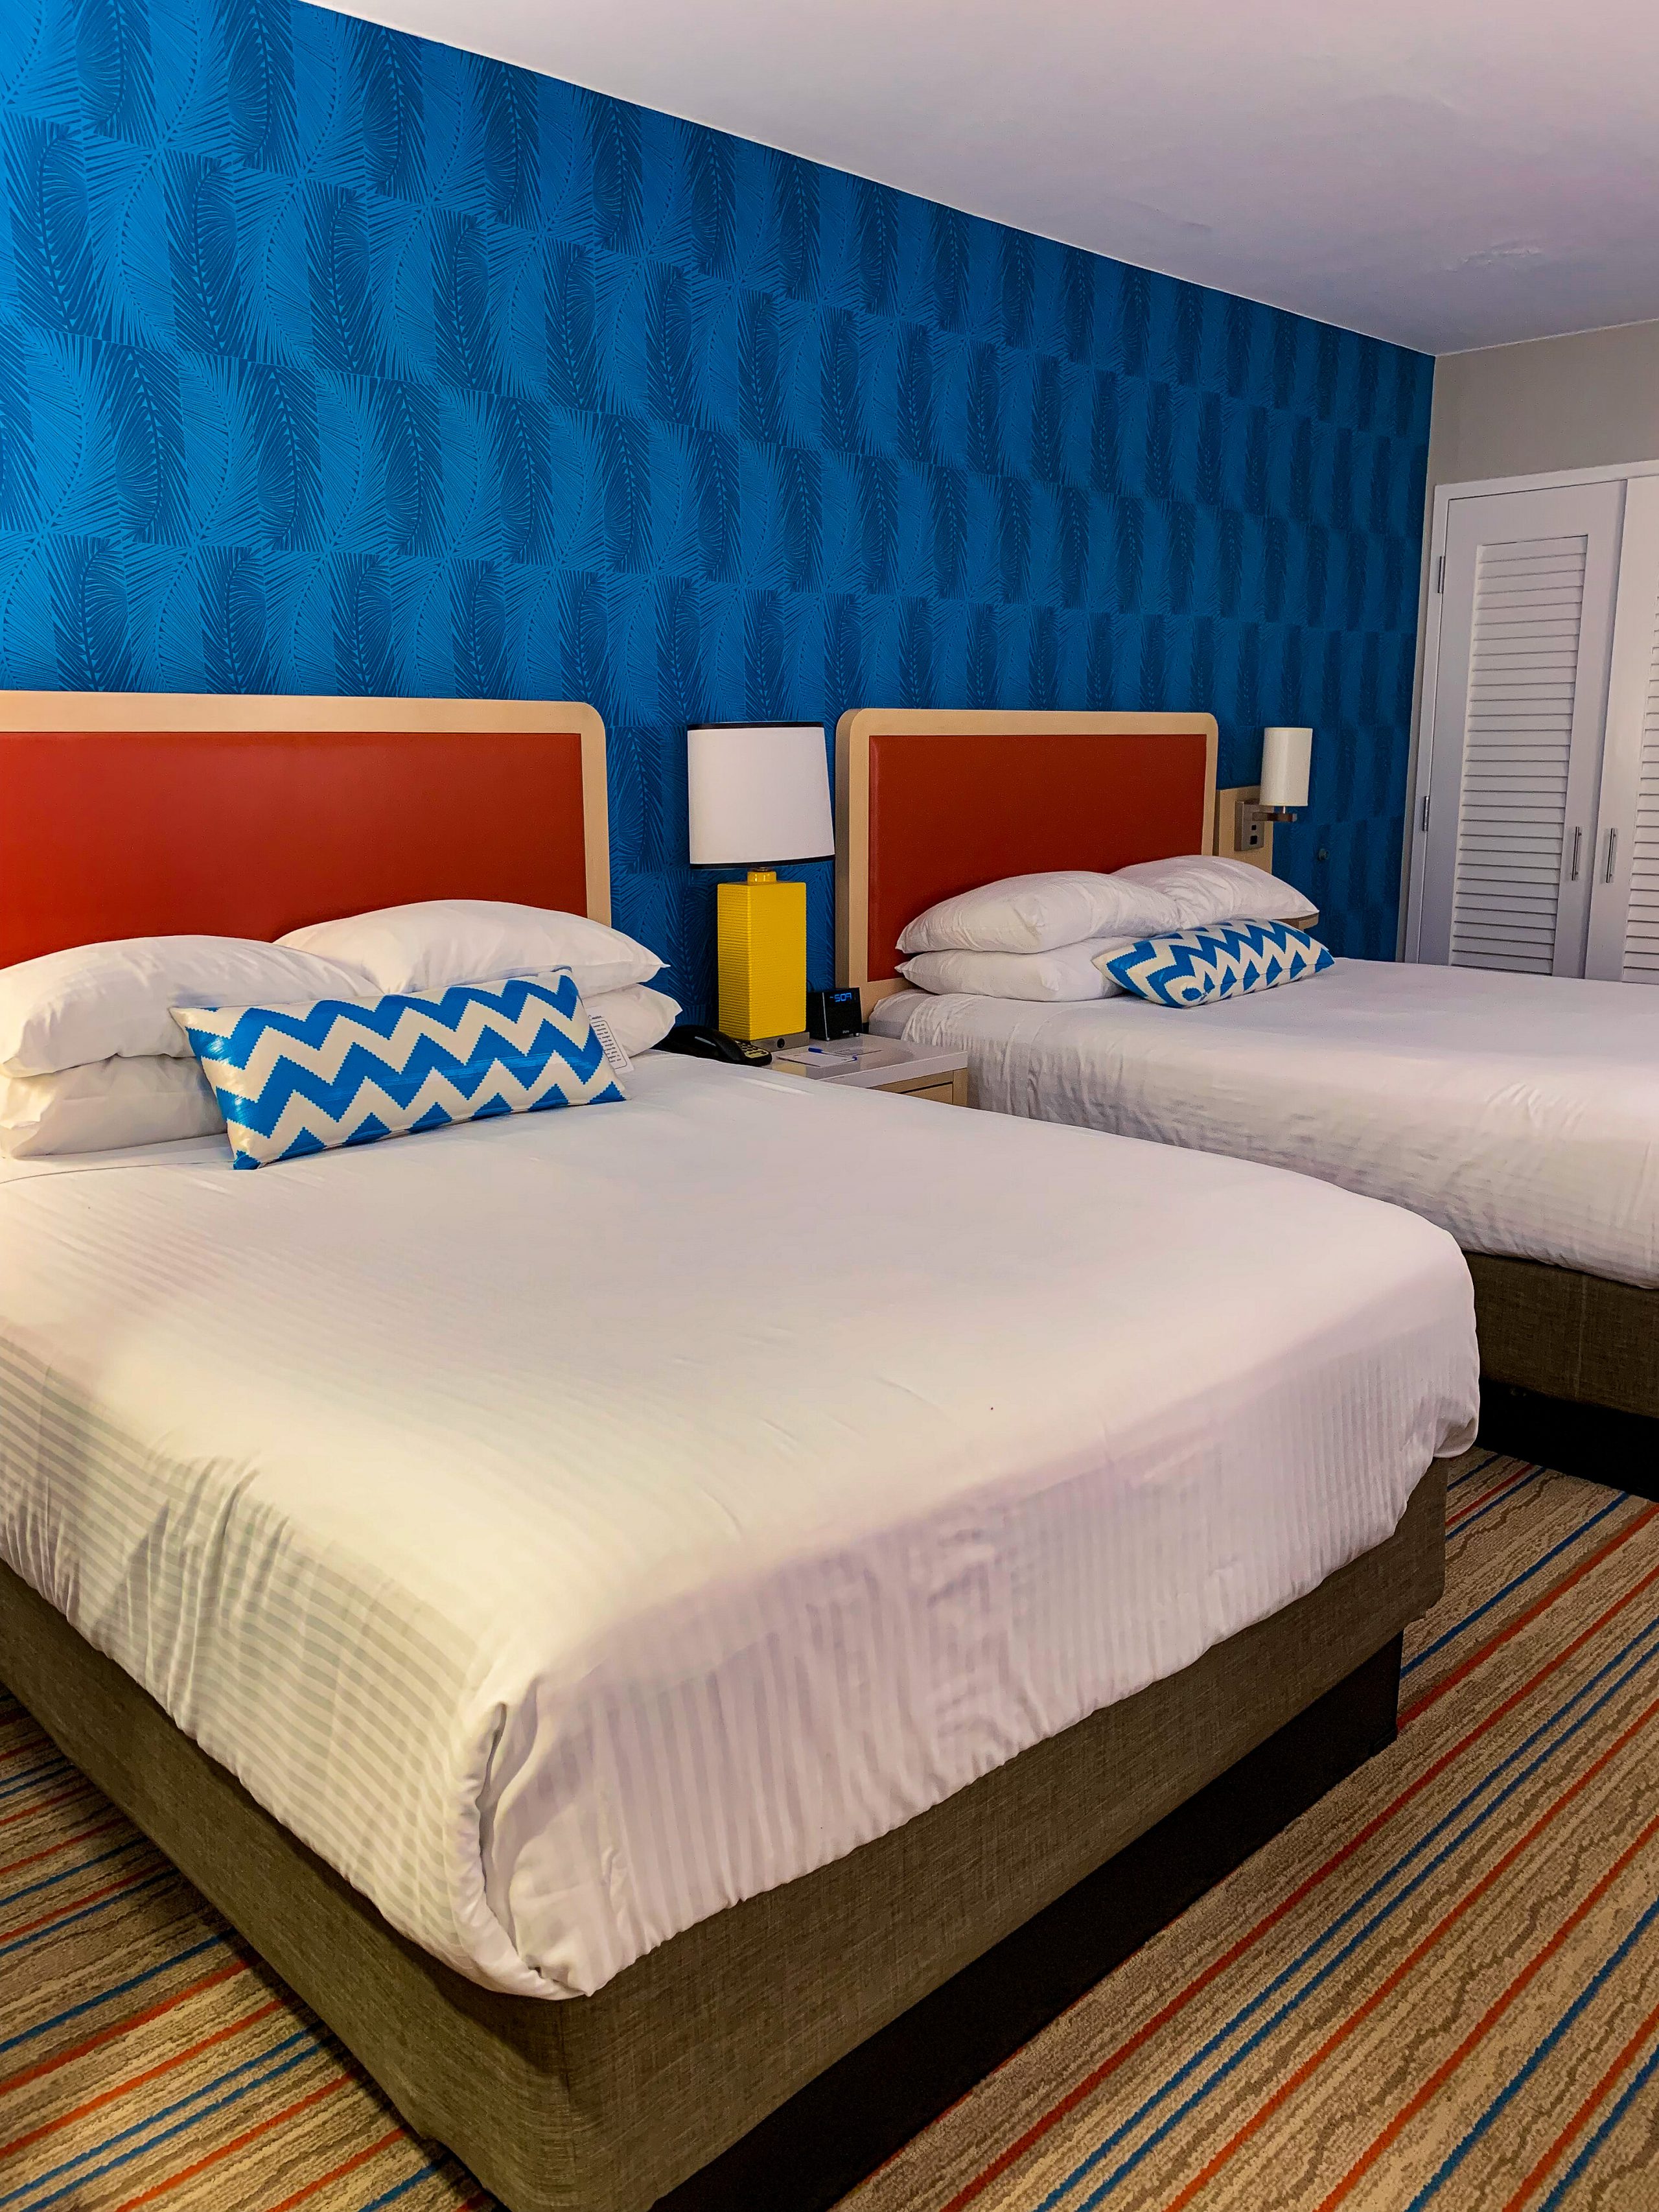 Looking for hotels around Disneyland? The Howard Johnson Anaheim is a GREAT family hotel option! Save this full family review for details!